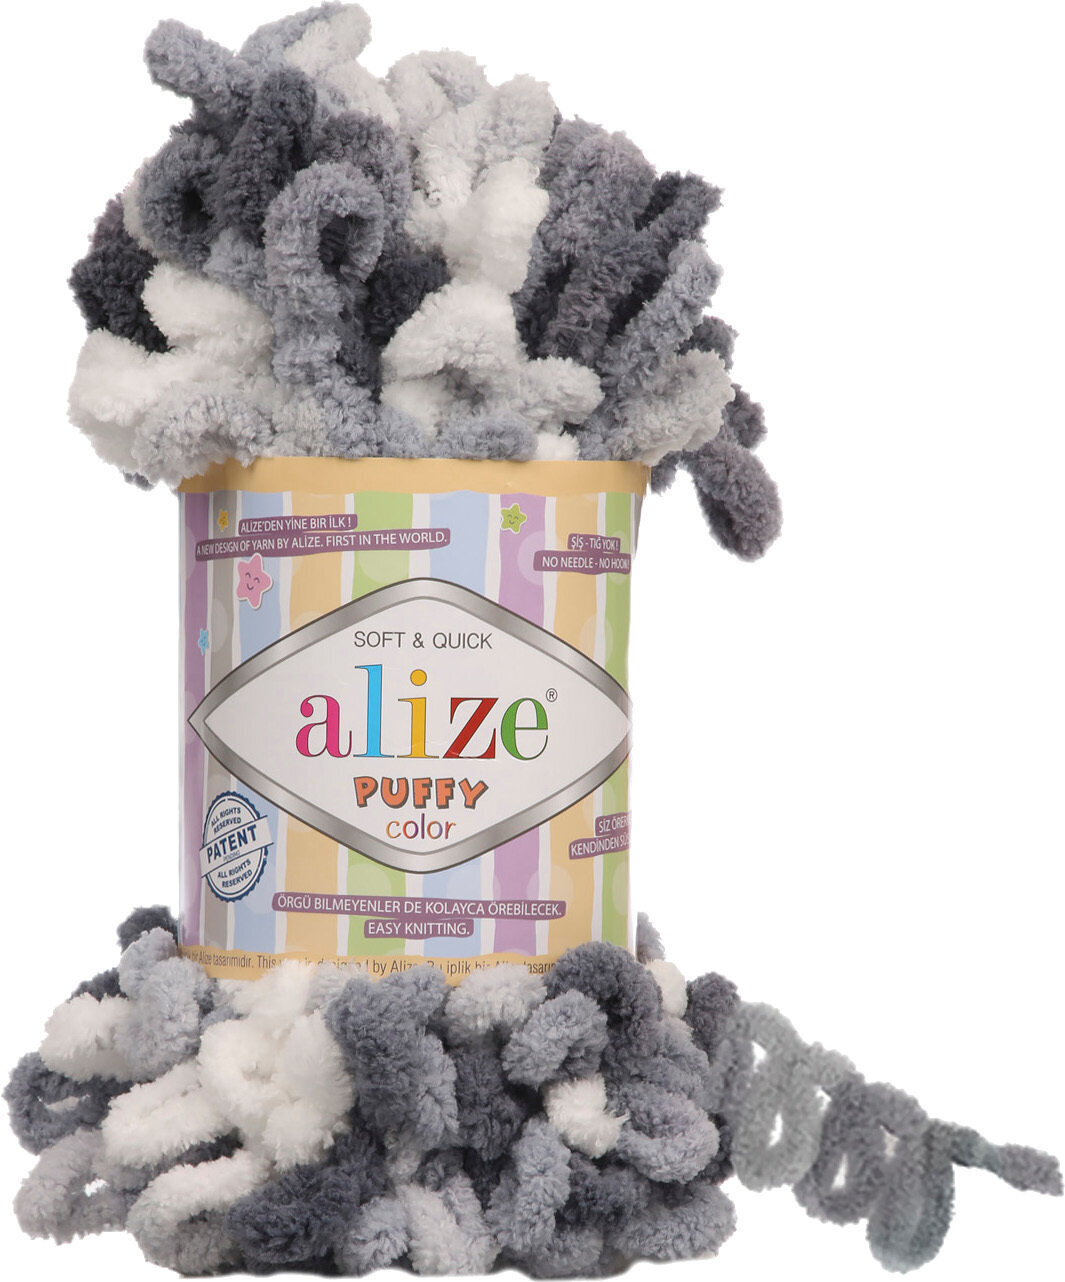 Breigaren Alize Puffy Color 5925